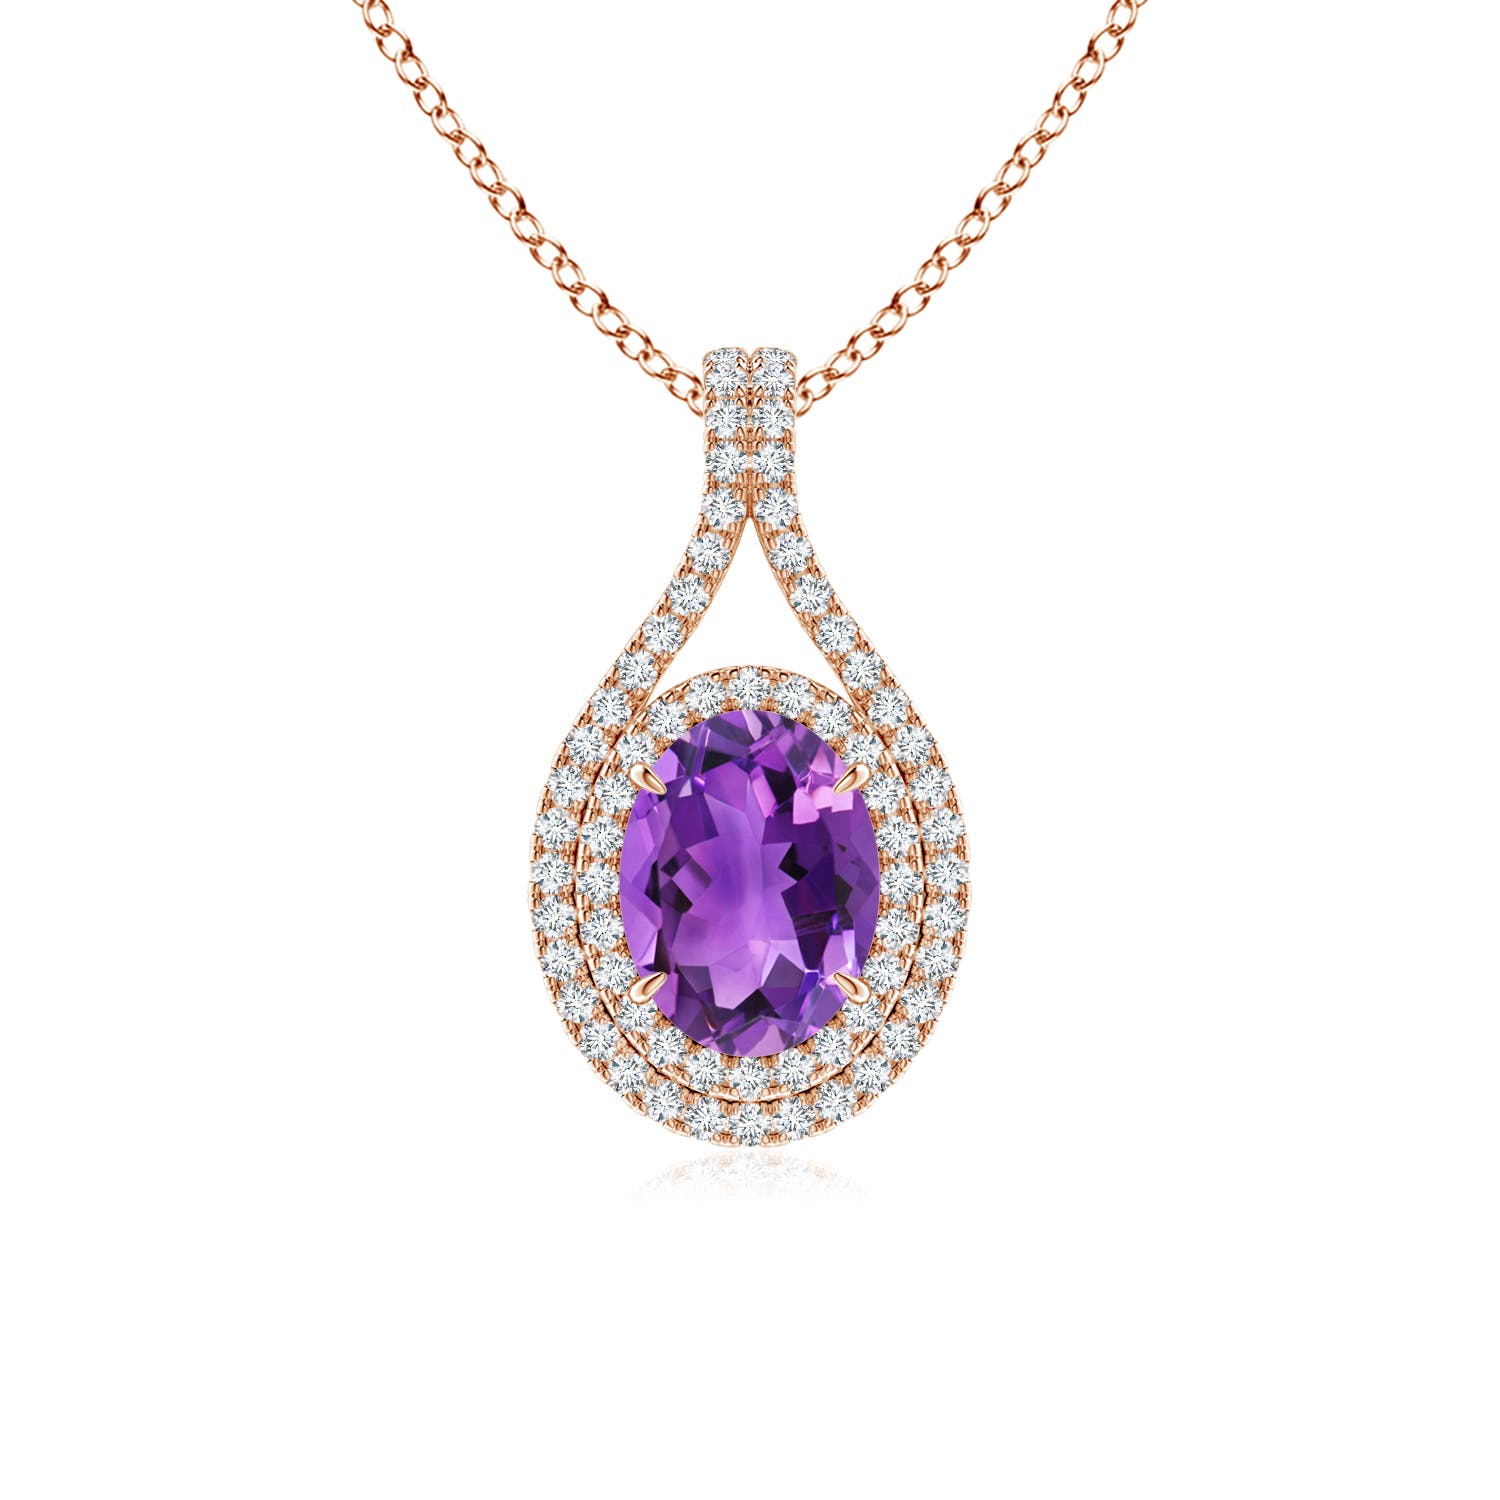 AAA - Amethyst / 1.45 CT / 14 KT Rose Gold